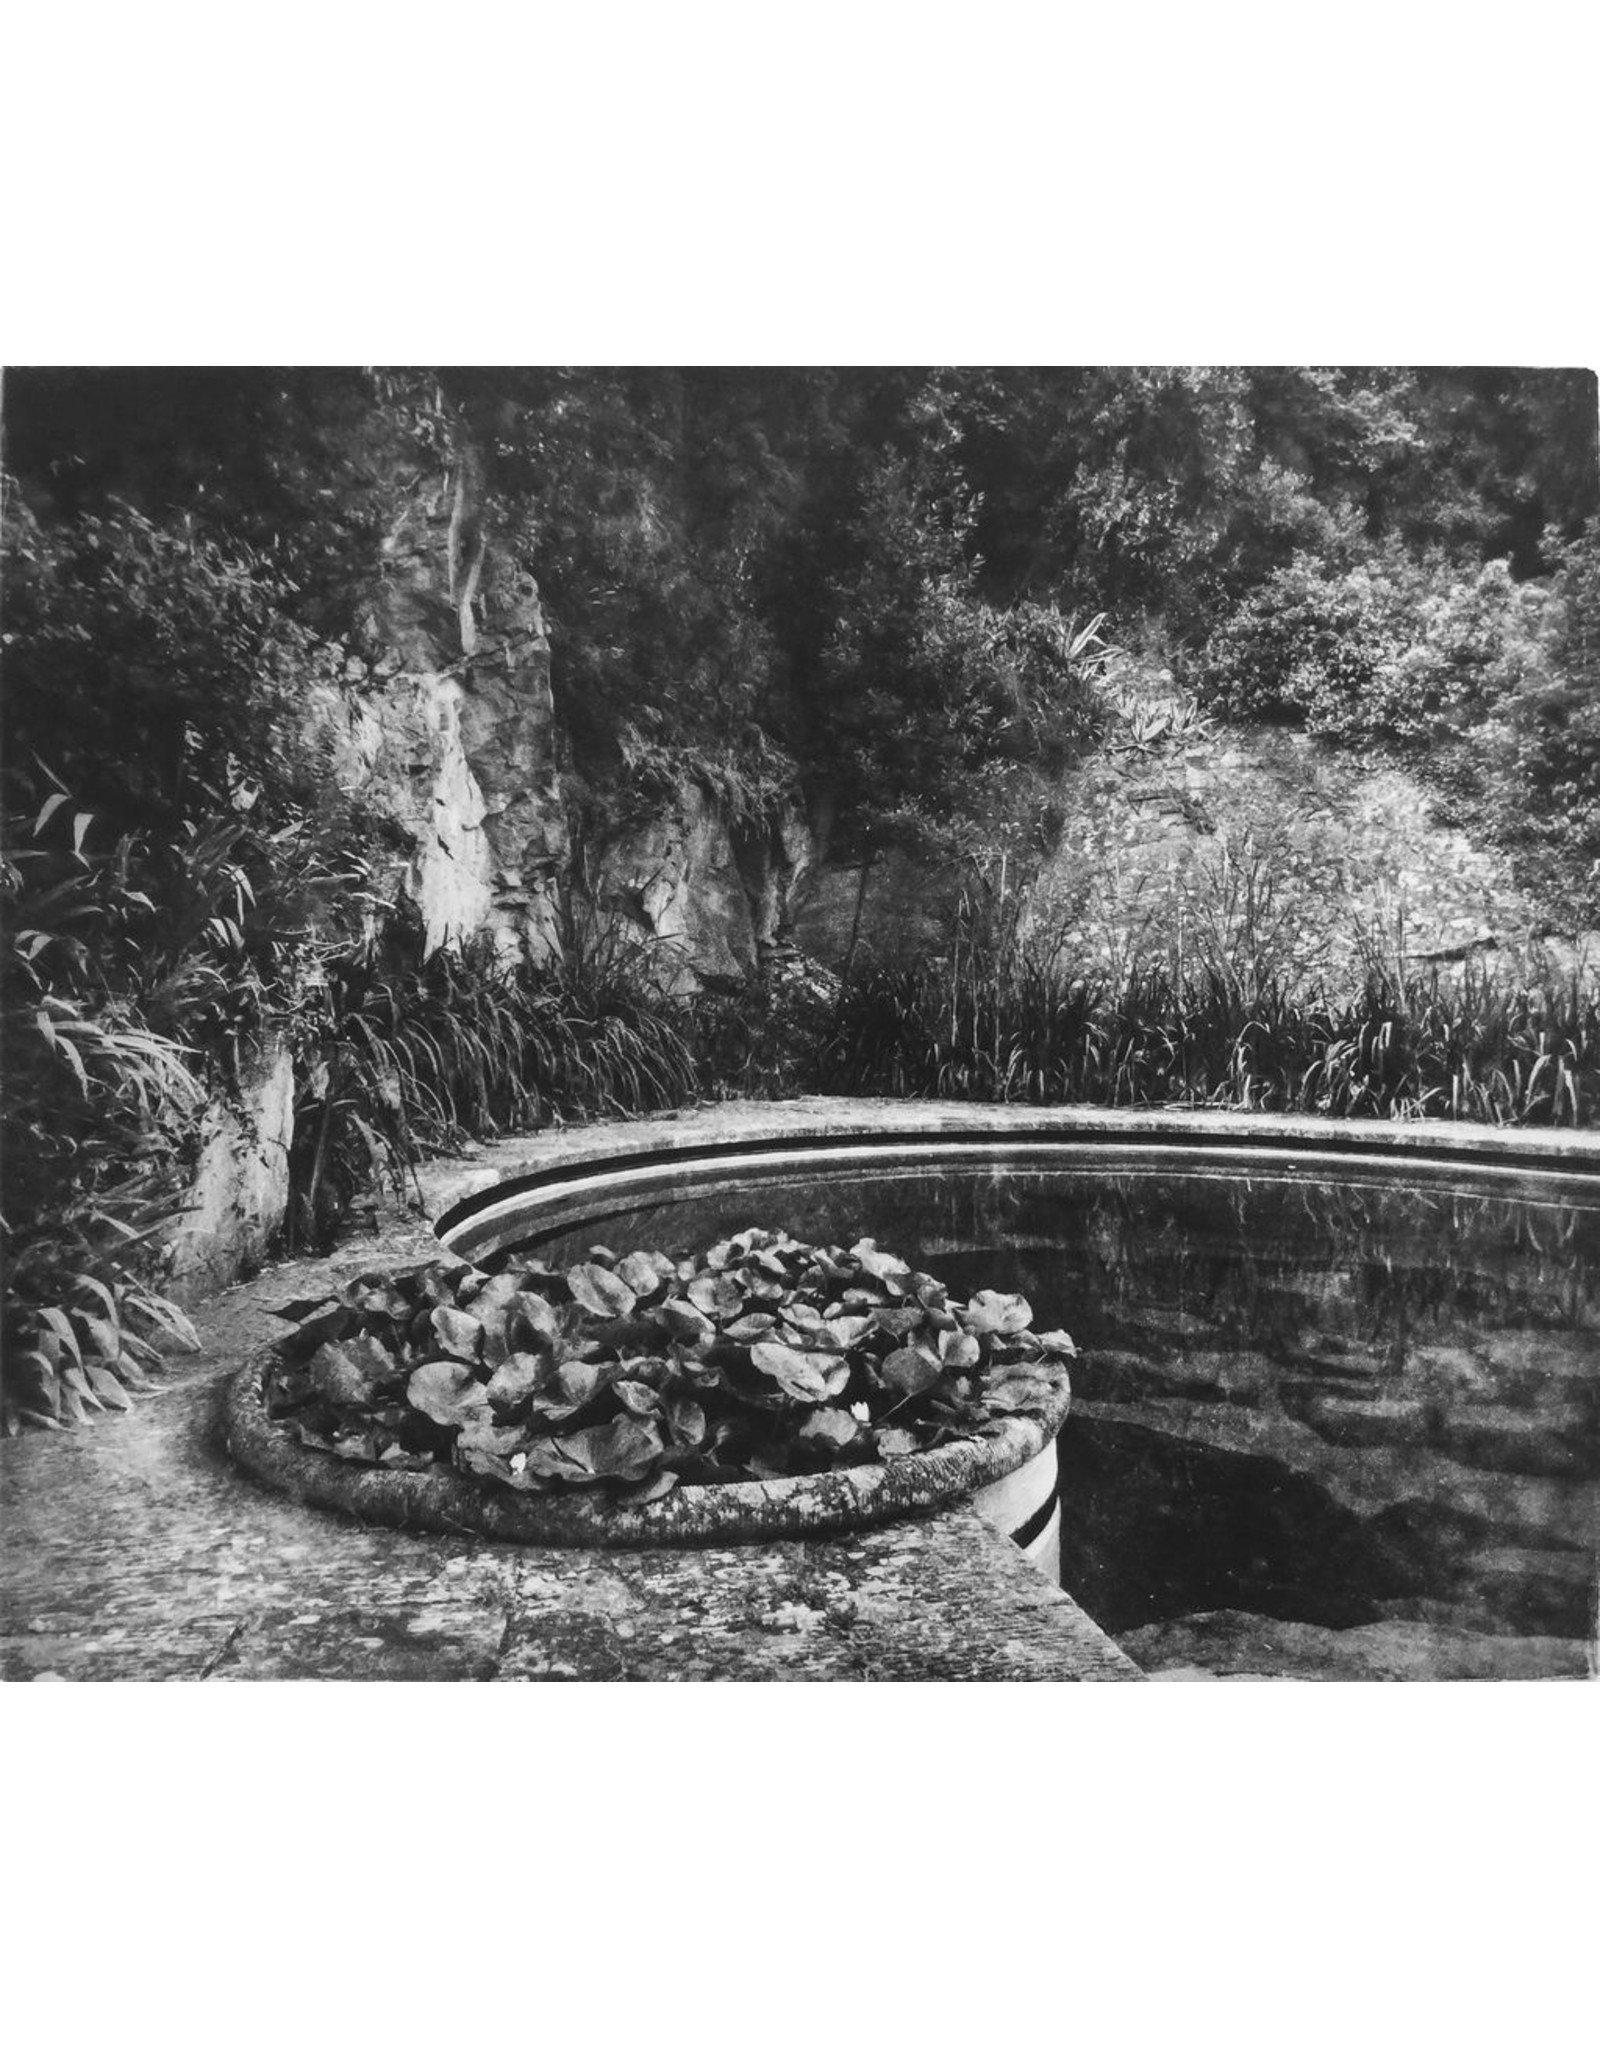 McLachlan, Ted Villa Fontanelle, Florence - Lotus Pool, Ted McLachlan